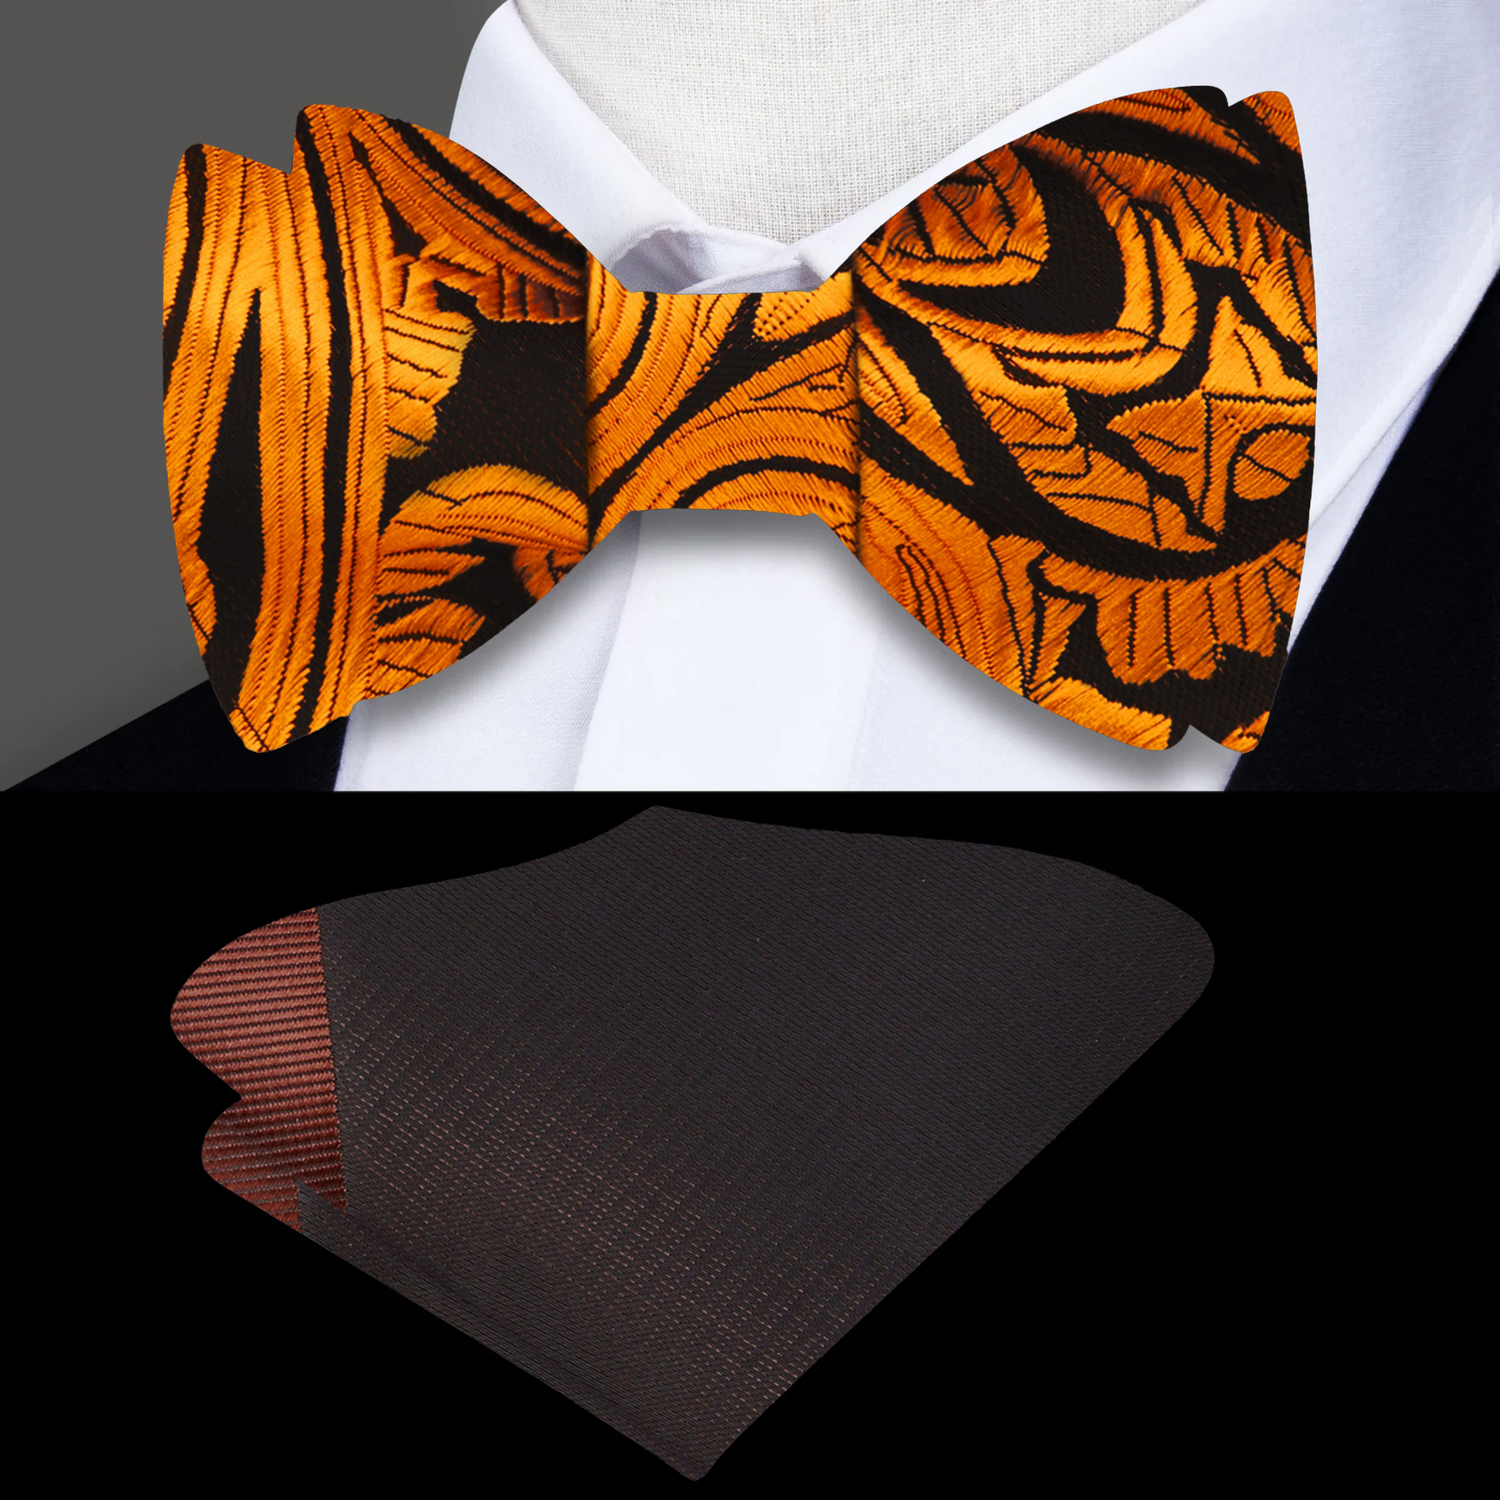 A Inca Gold, Rich Brown Elaborate Floral On Edge of Paisley Pattern Silk Self Tie Bow Tie, Accenting Pocket Square